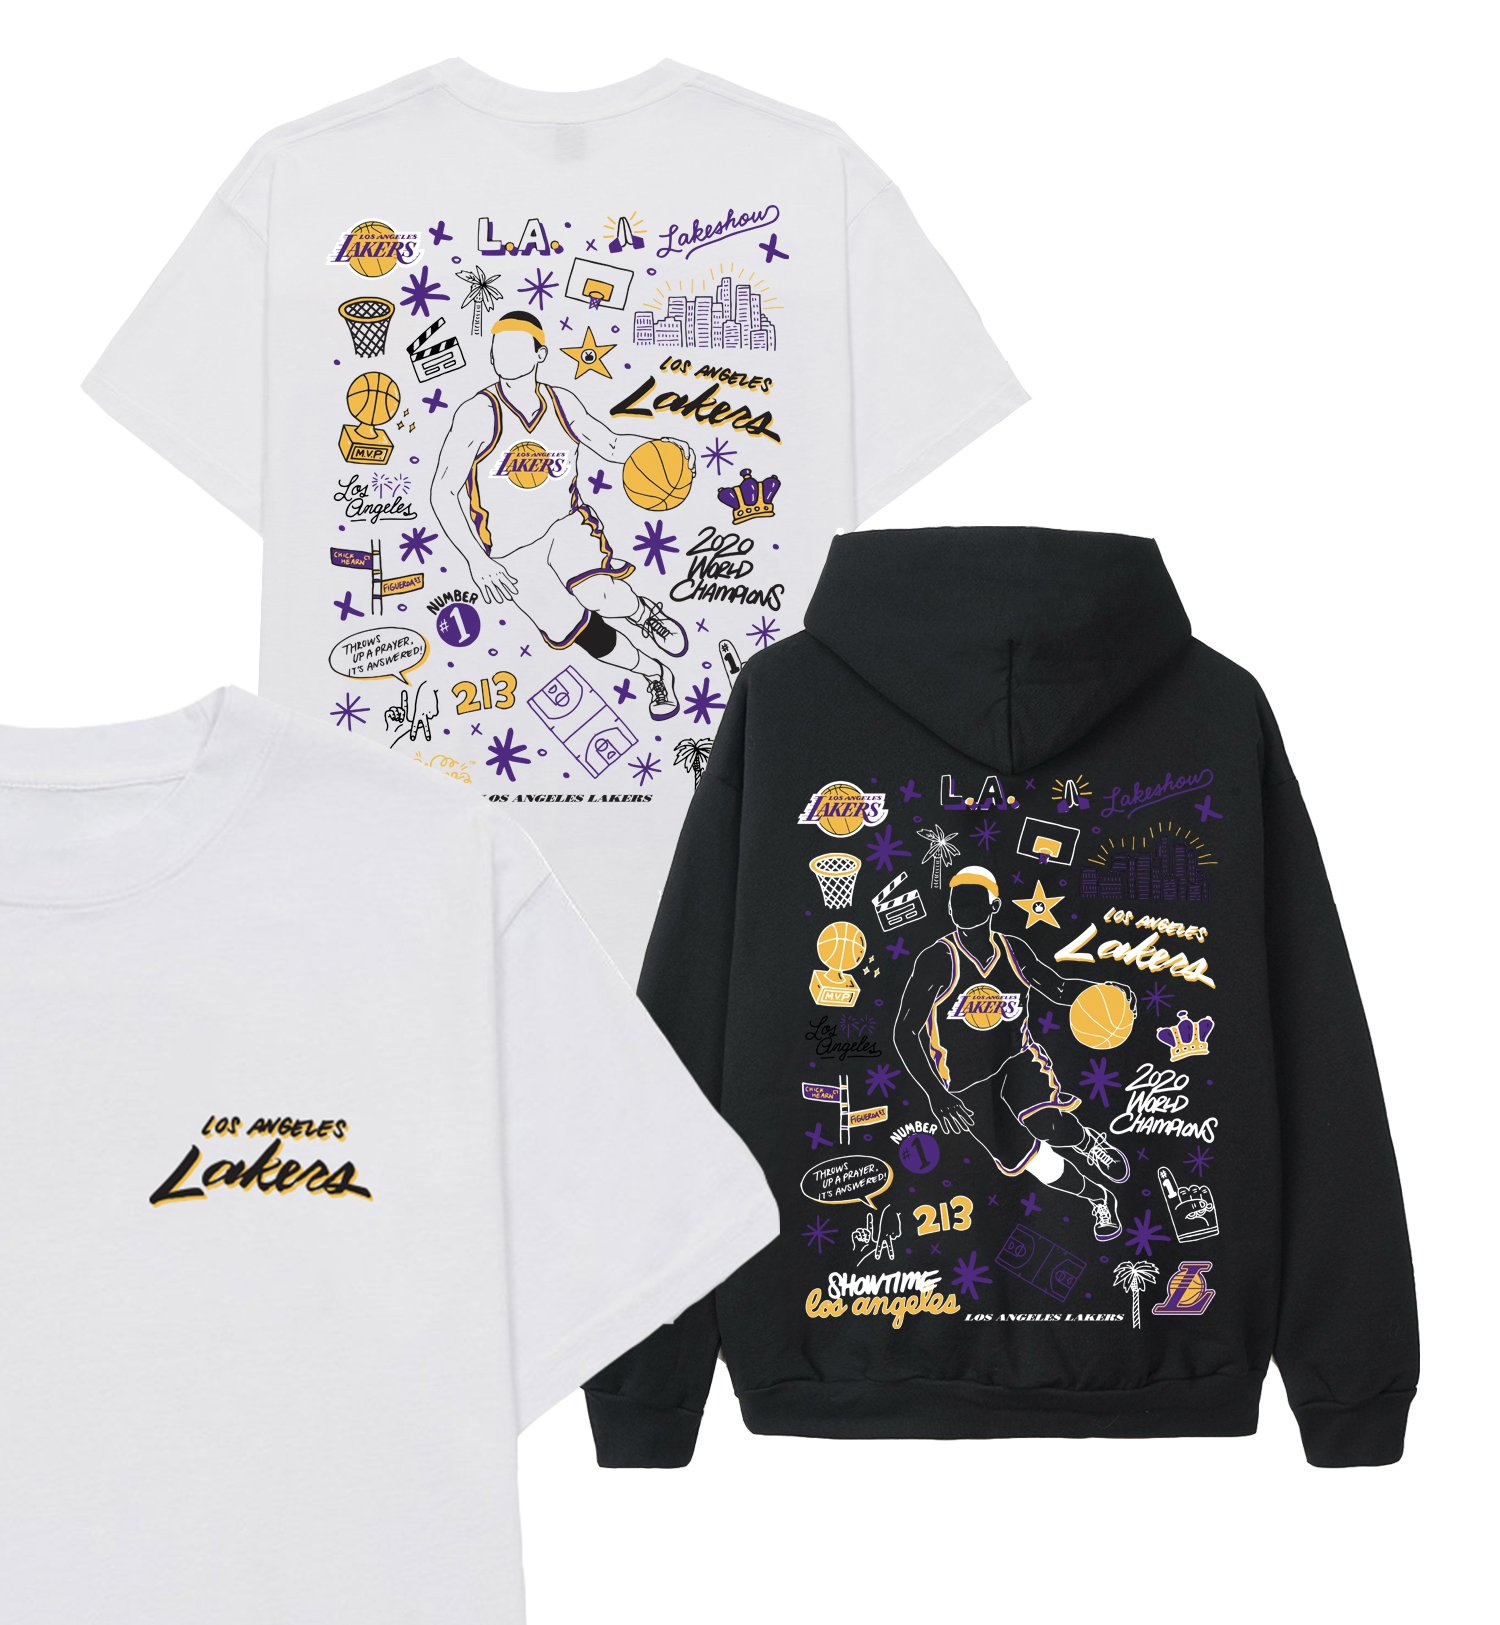 Los Angeles Lakers on X: New York Fashion